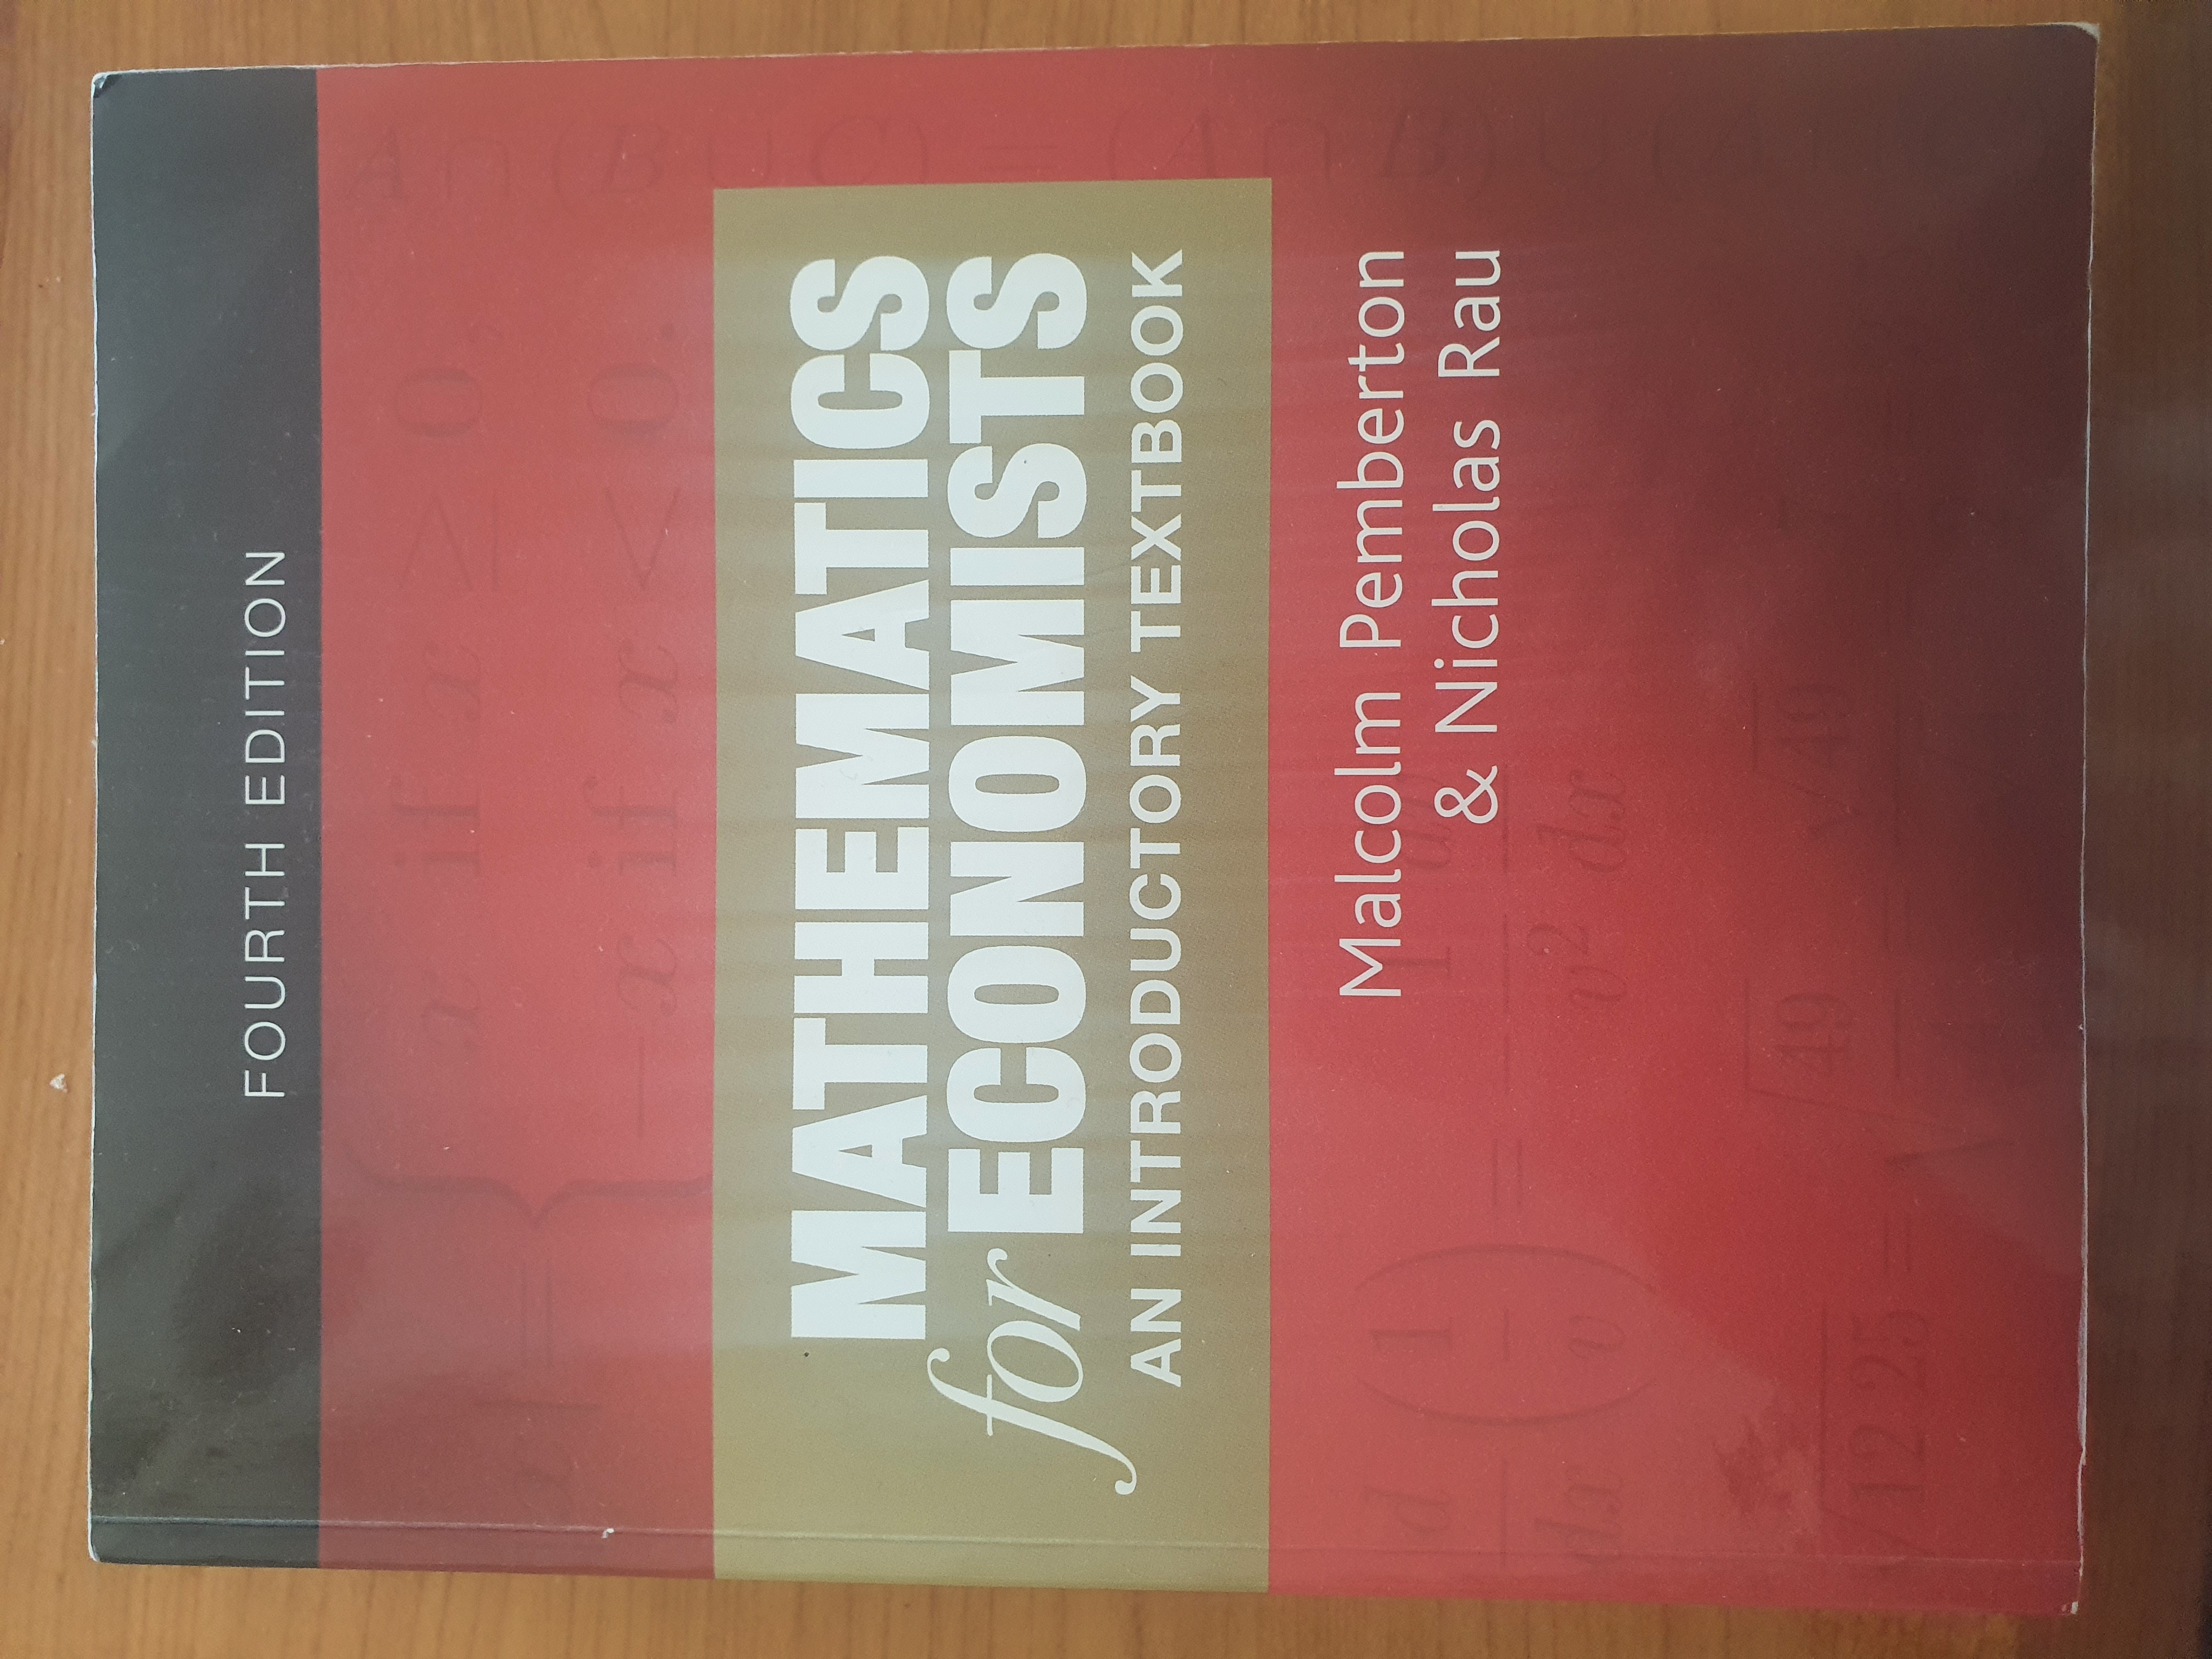 Mathematics for Economists textbook by Pemberton and Rau